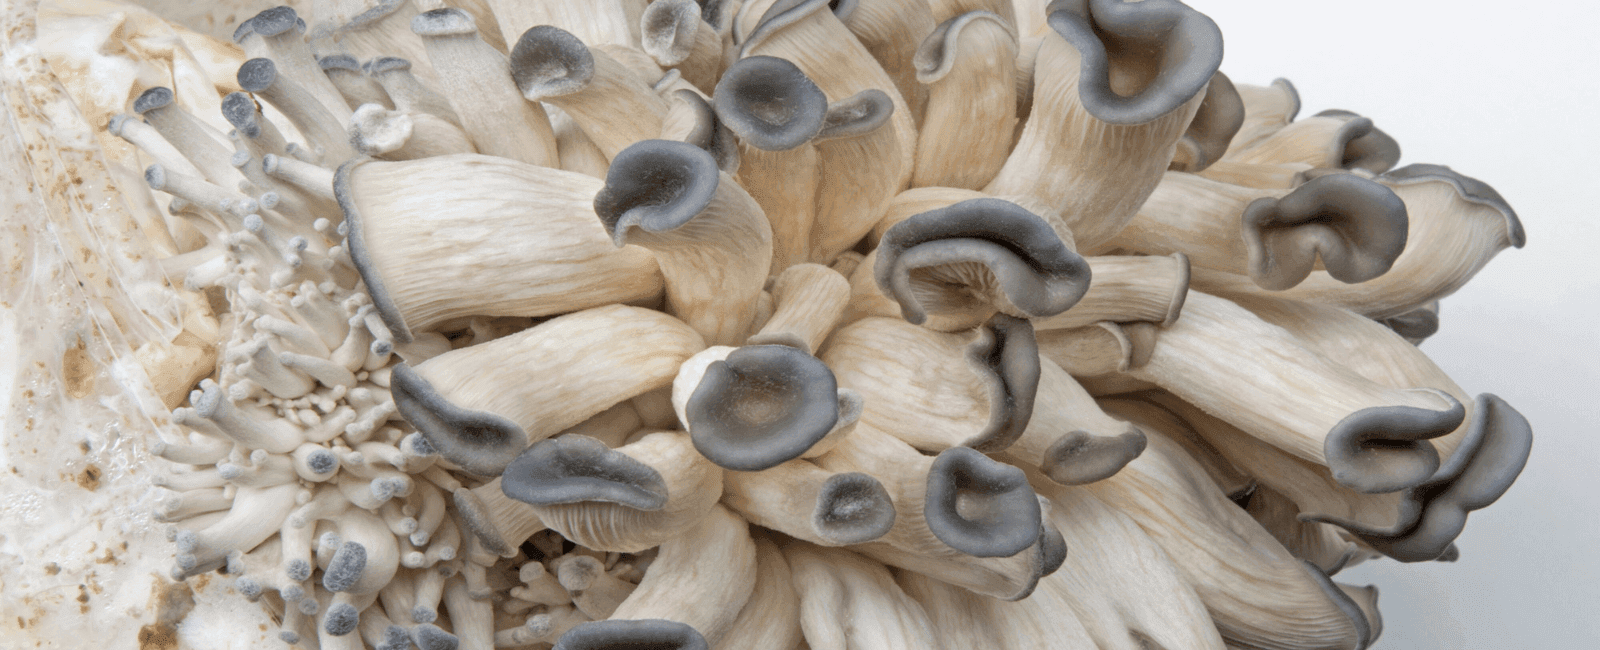 5 Ways You Can Make the Most Out of Your Old Mushroom Grow Kit